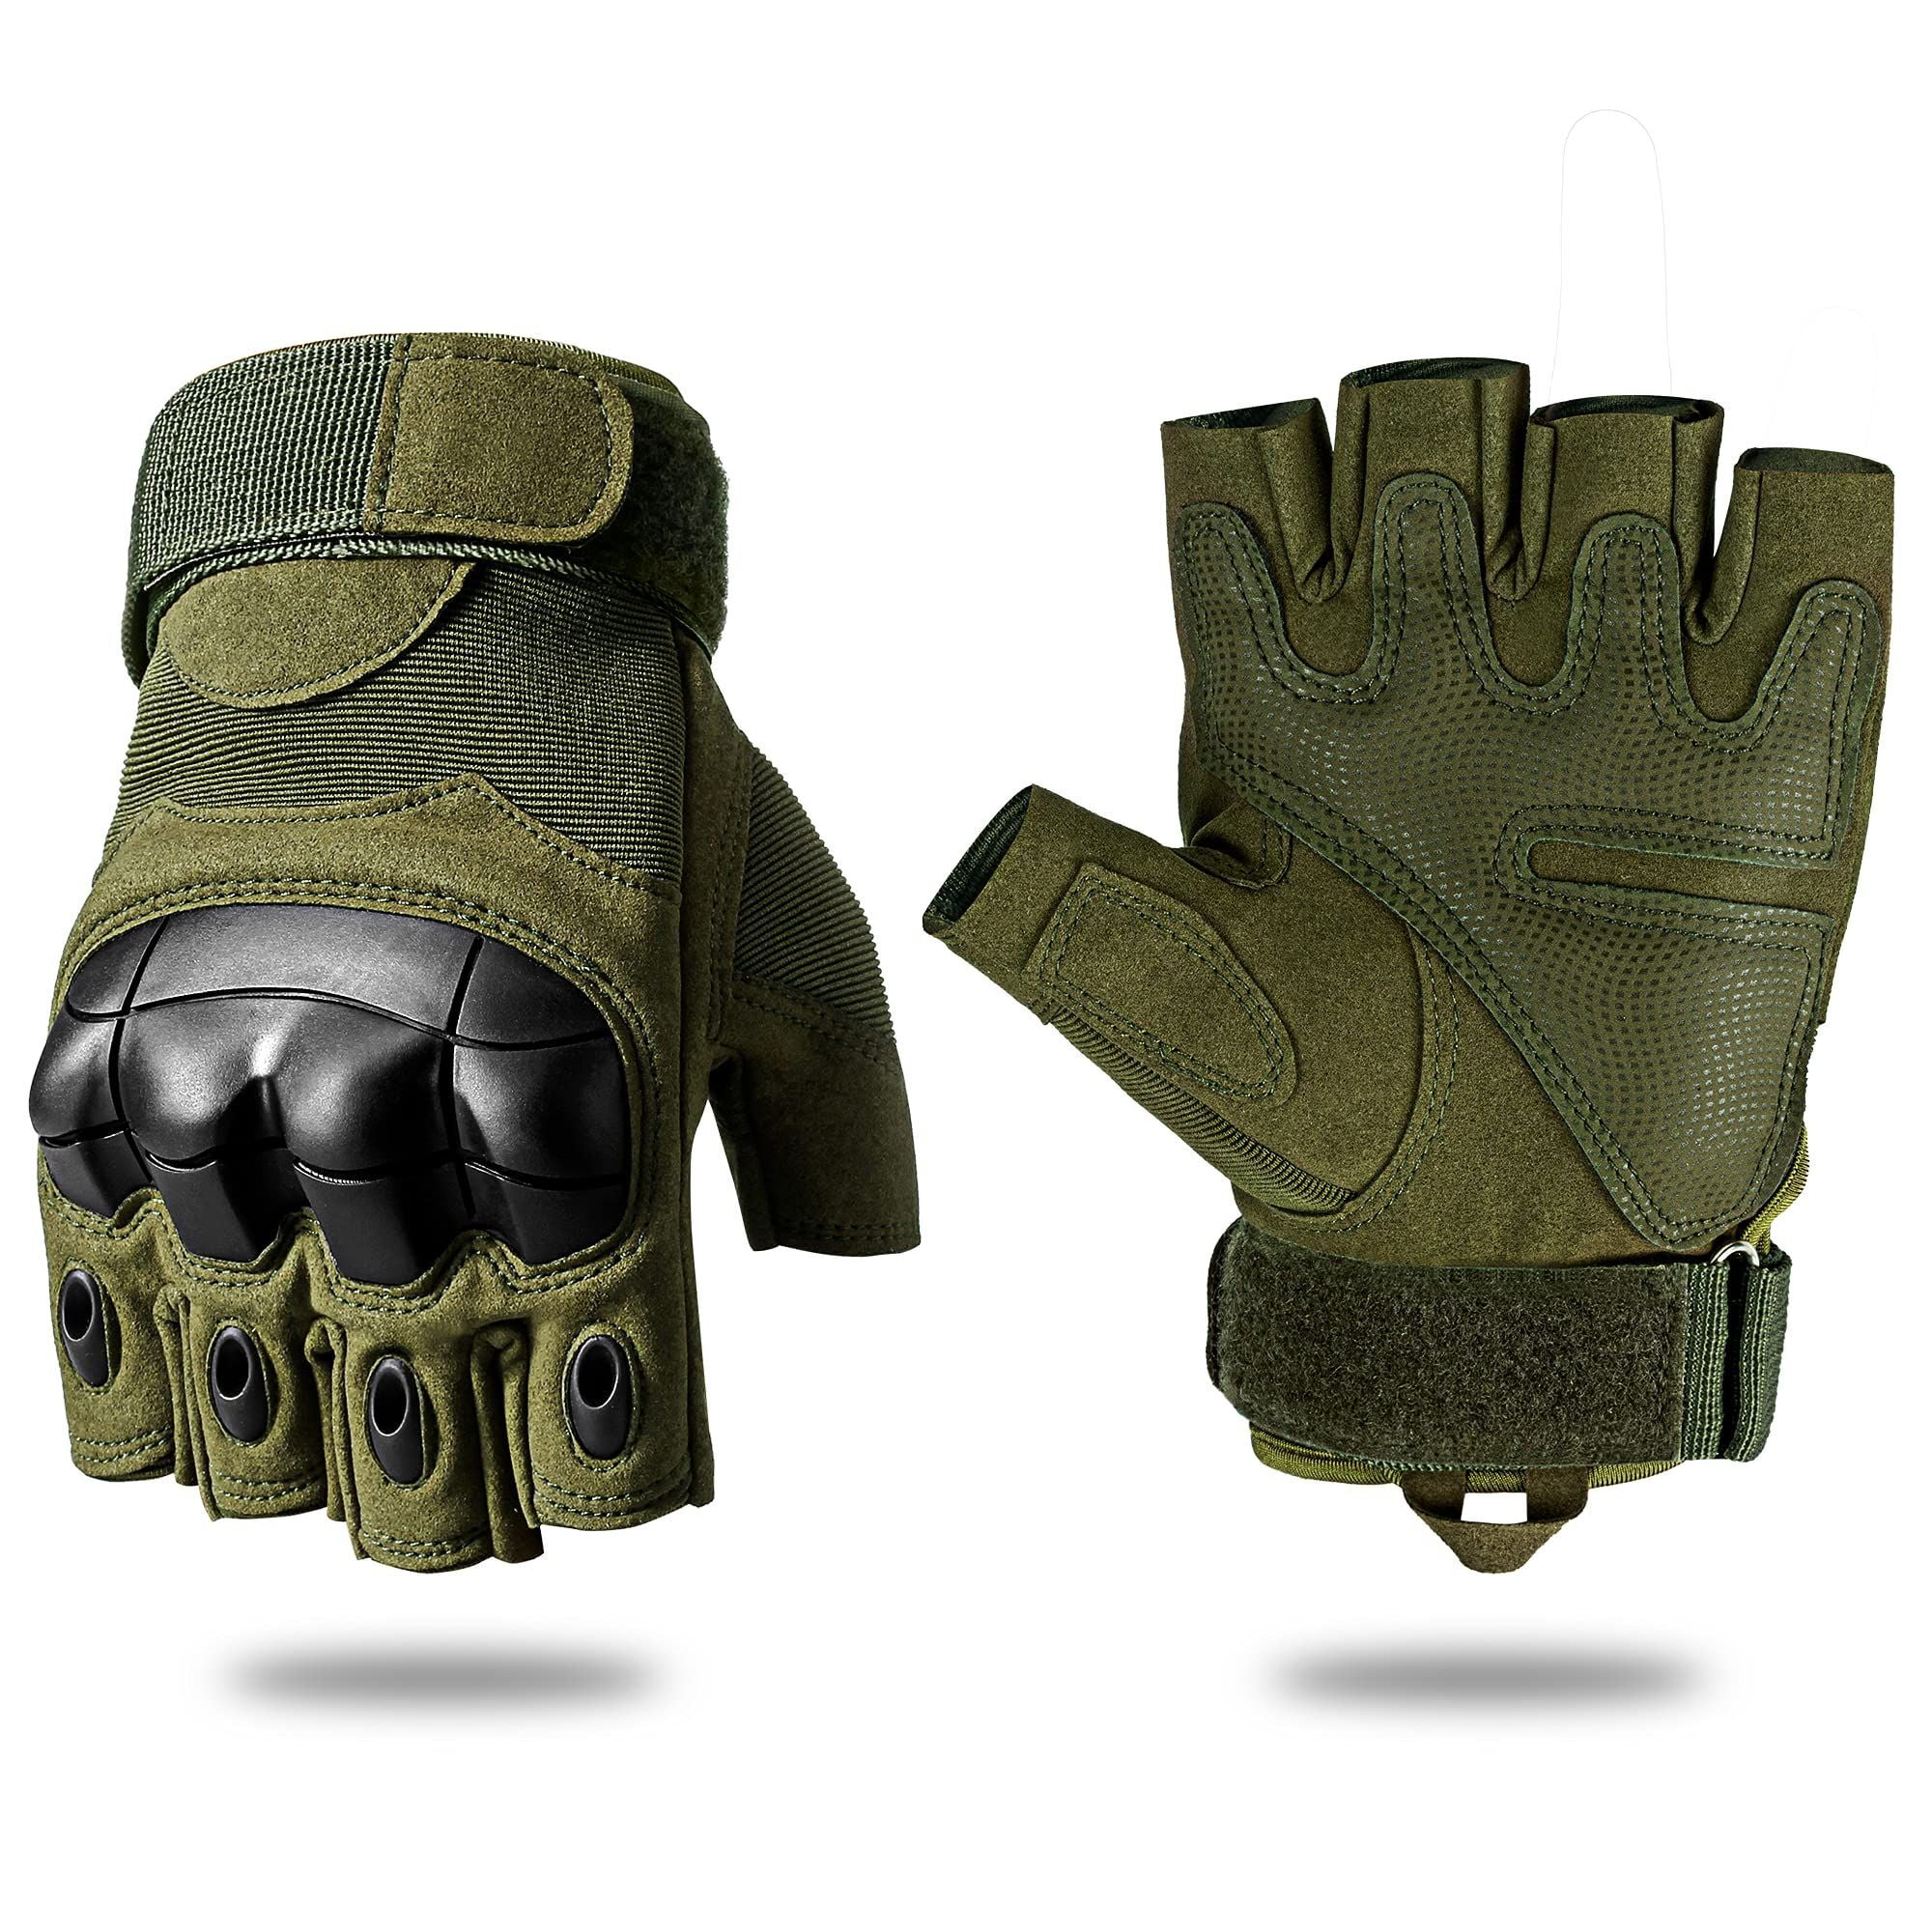 Men's Tactical Half Finger Gloves Fingerless Knuckle Cycling Shooting Motorcycle 